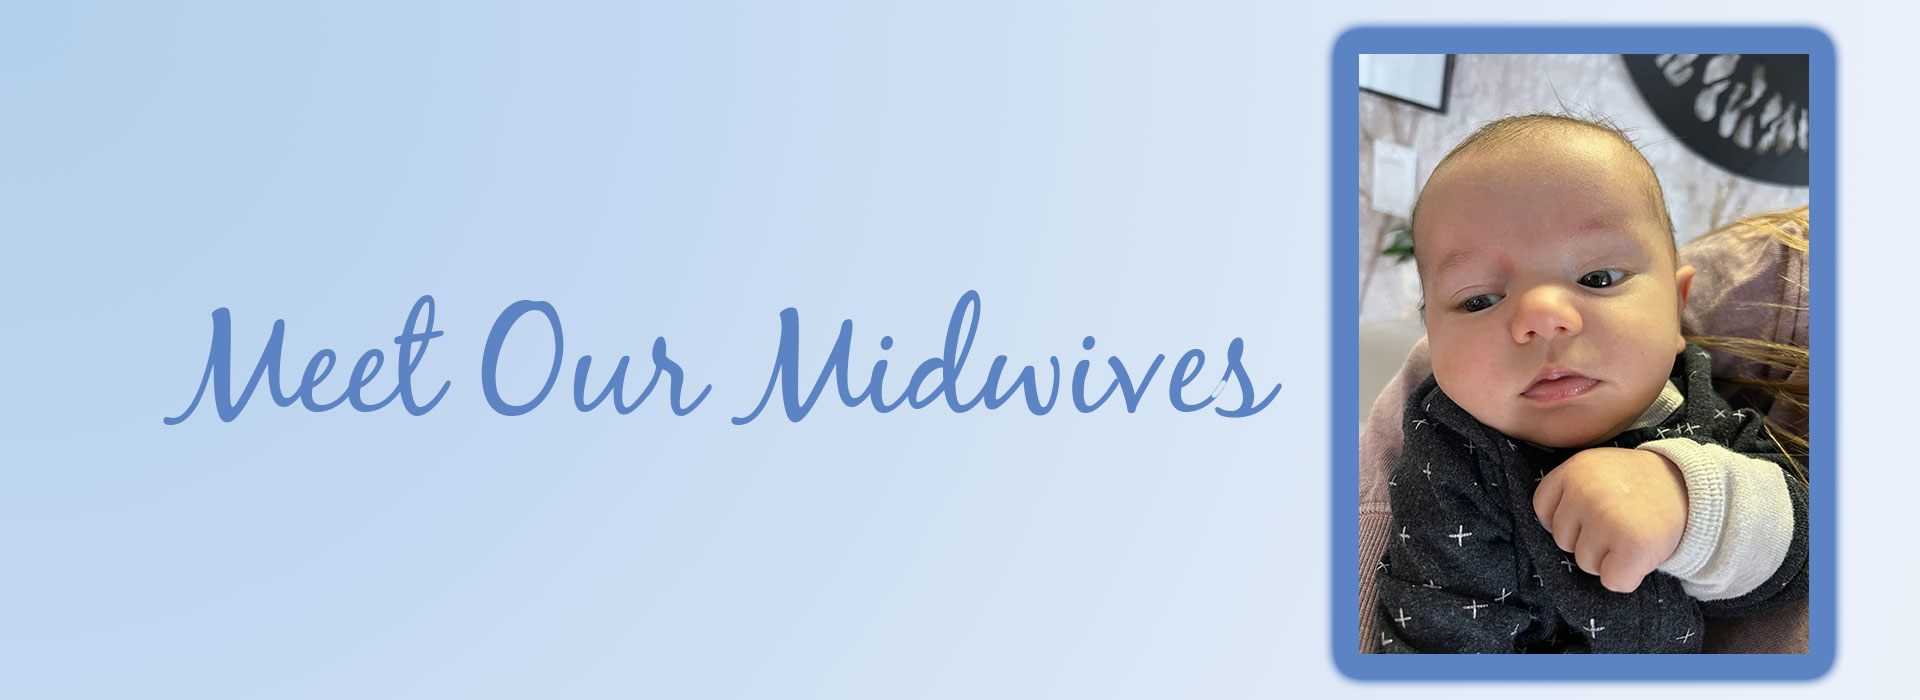 Airdrie Briar Hill Midwives are experienced midwives focussing on Airdrie and surrounding area mothers-to-be.